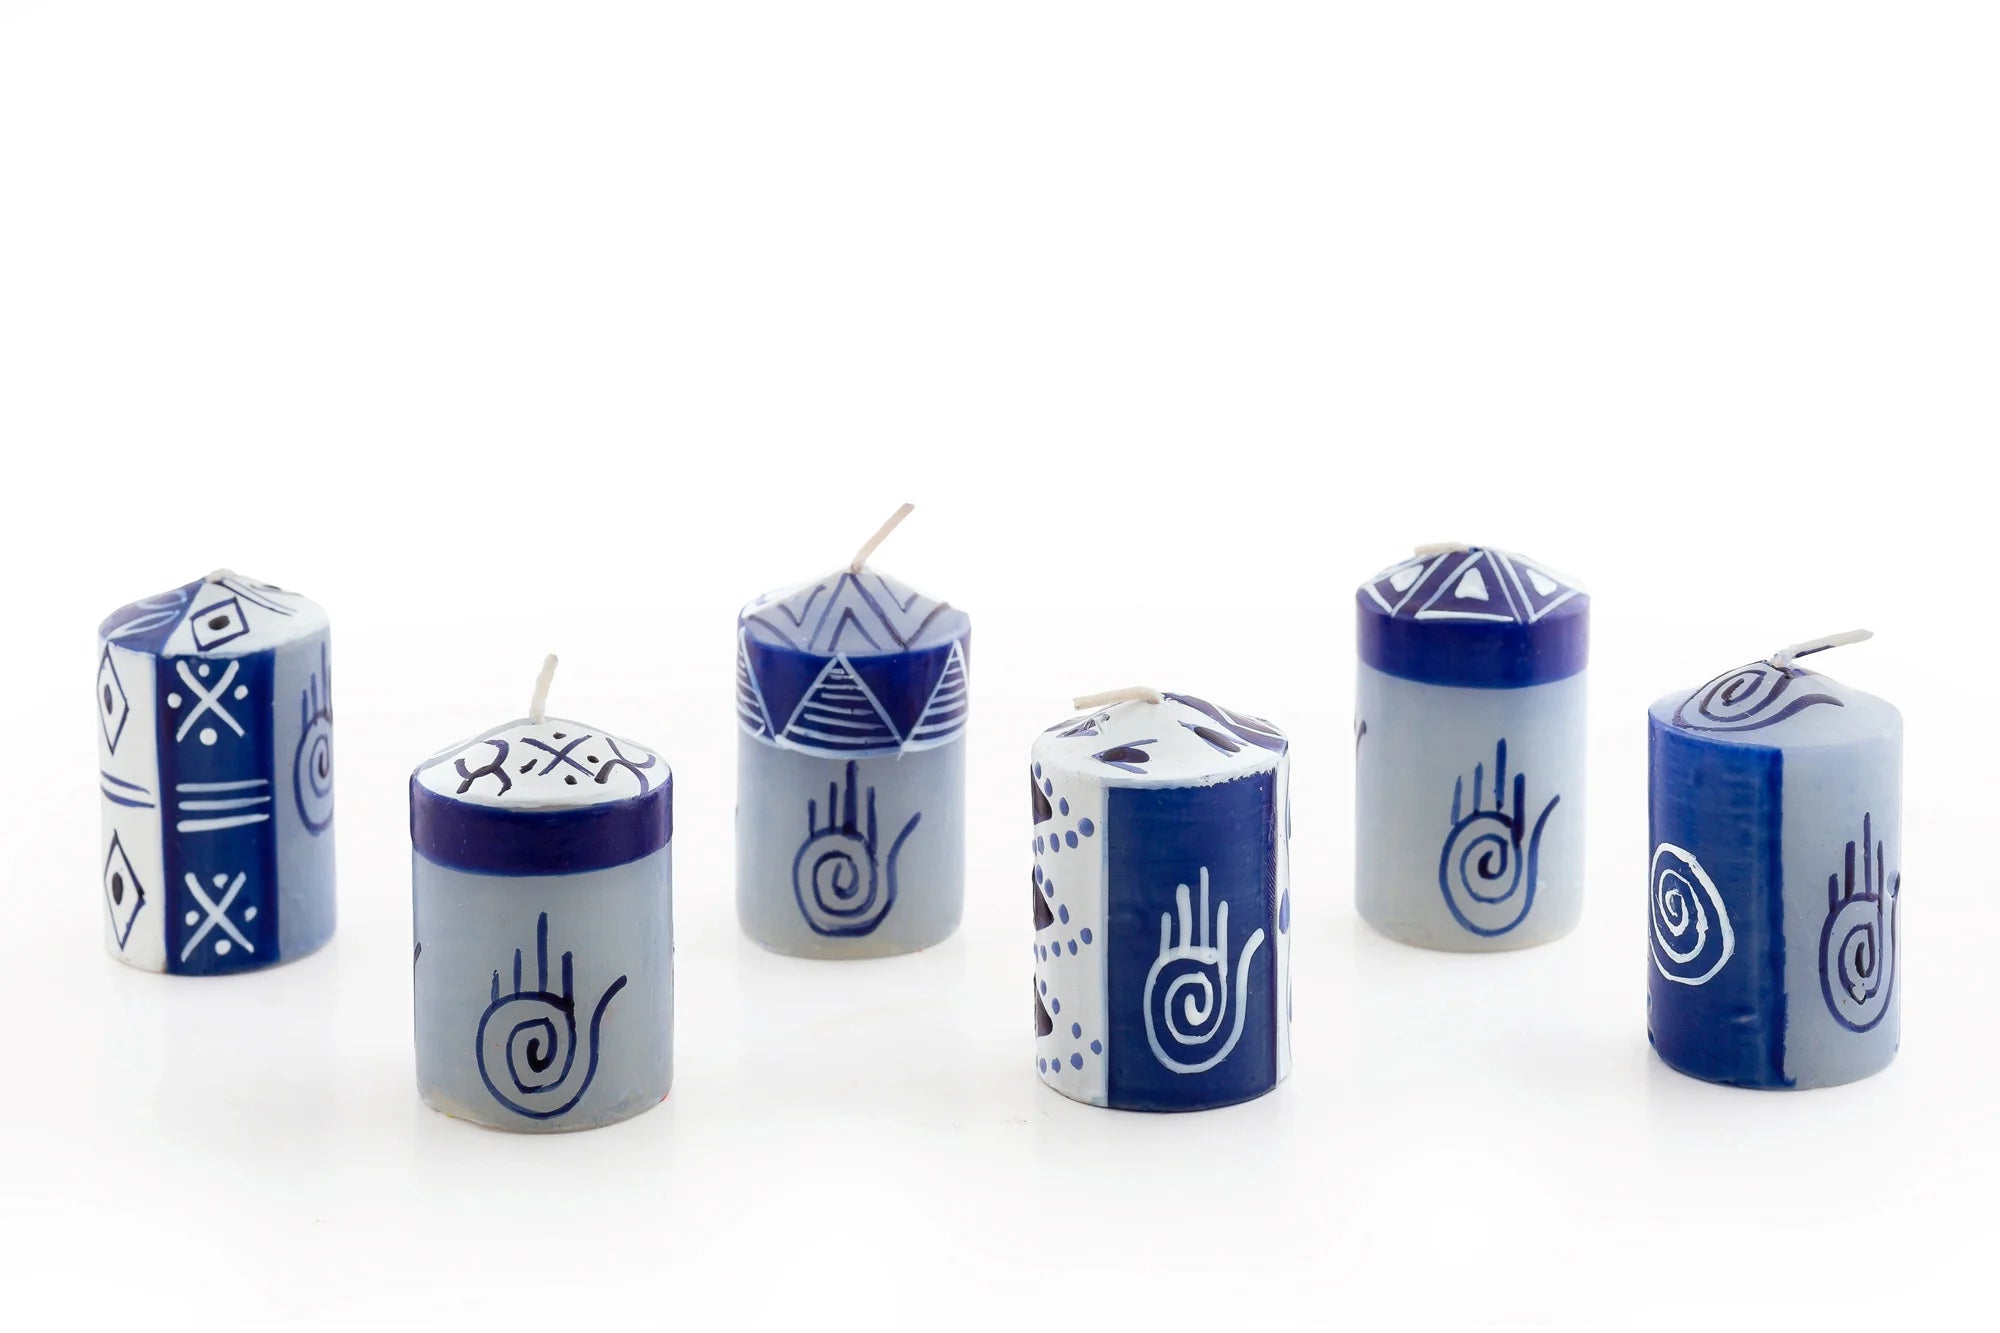 6/ 2" Hamsa votive candles painted in blue & white geometric designs with the Hamsa Hand included in the design